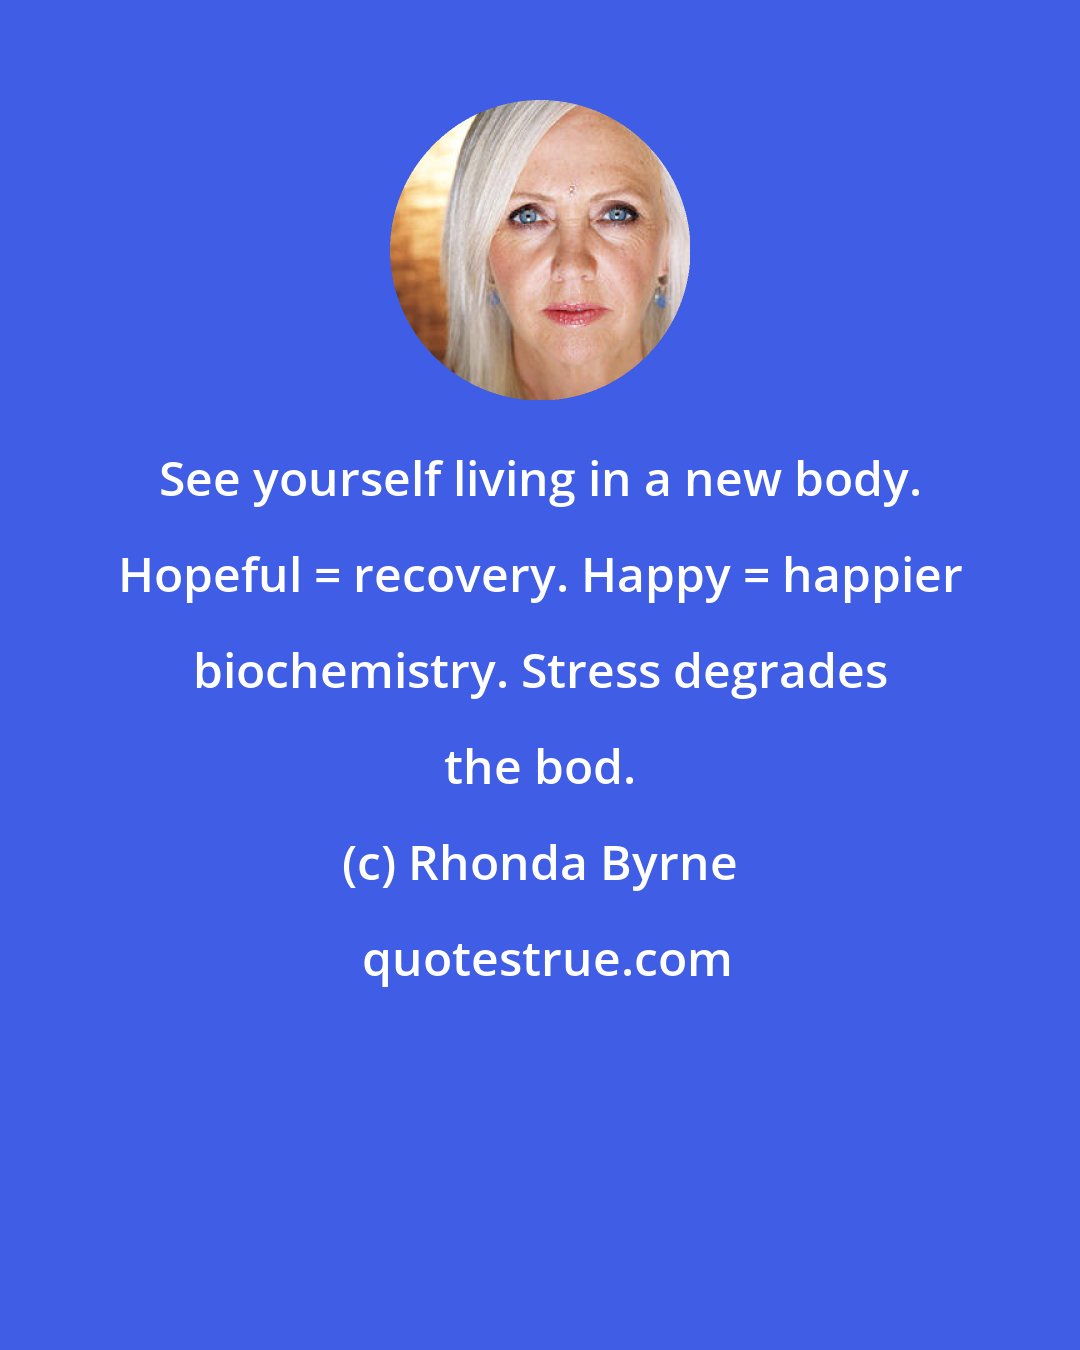 Rhonda Byrne: See yourself living in a new body. Hopeful = recovery. Happy = happier biochemistry. Stress degrades the bod.